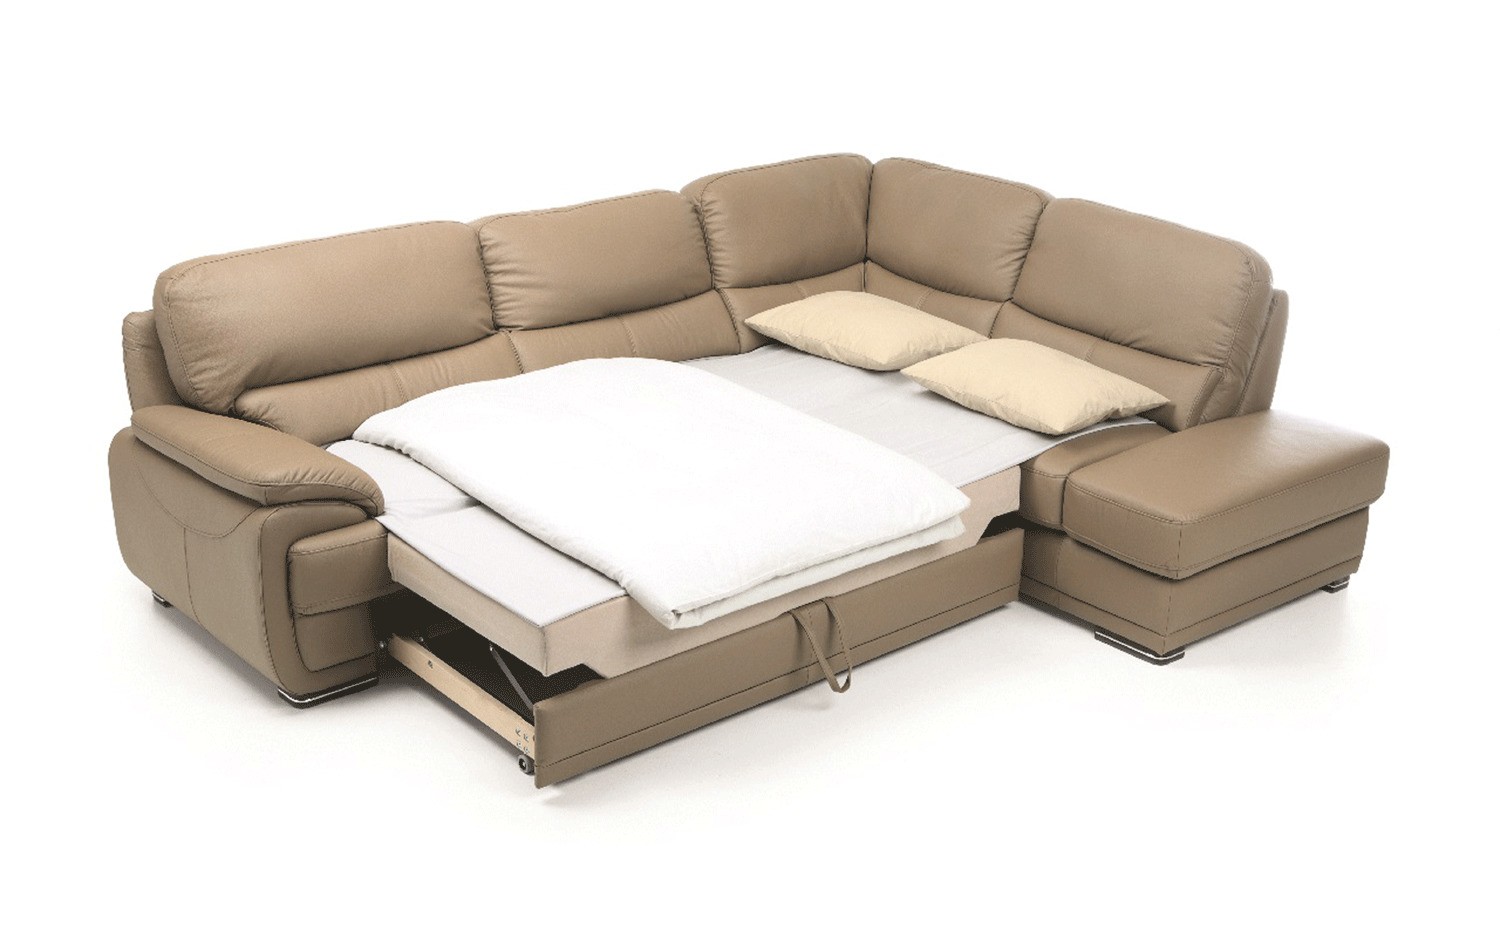 Real leather sectional sleeper with pull out bed kansas 2